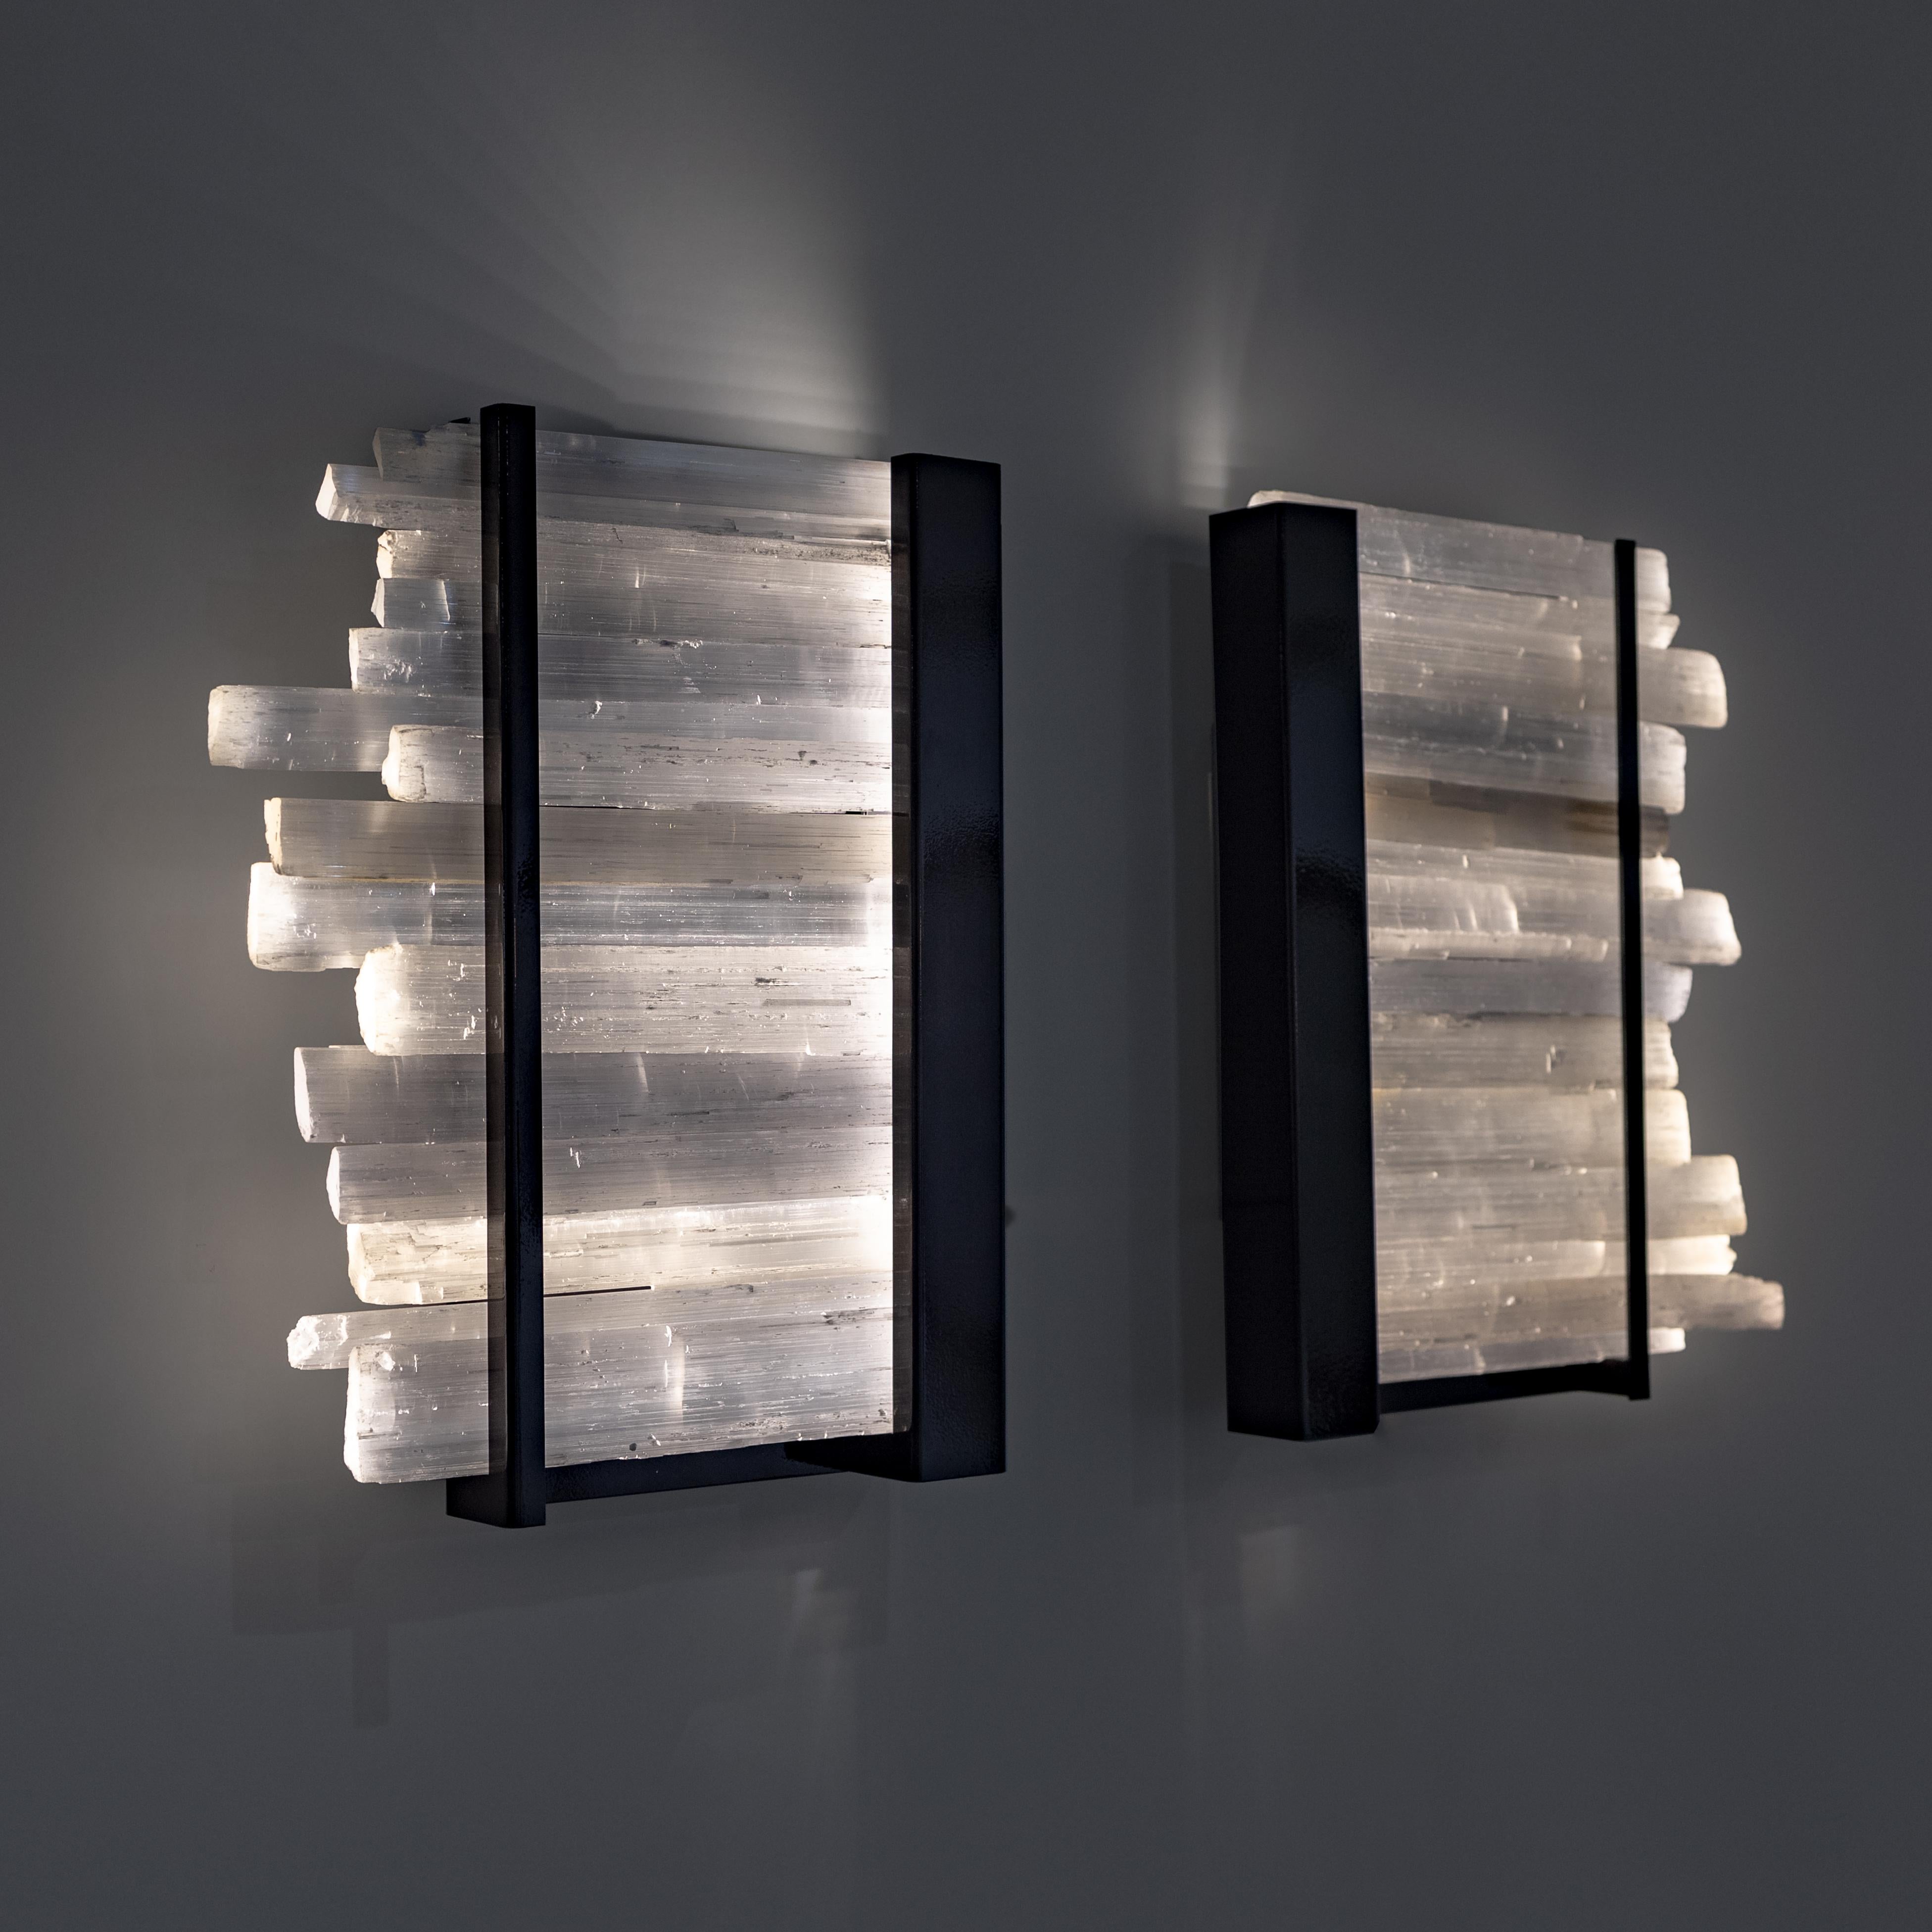 Arctic lighting Selenite crystal wall sconce with metal base
Selenite crystals from Morocco
Powder-coated metal base

These crystals are named after a Greek goddess of the moon, due to a legend of
Central Europe which tells that this